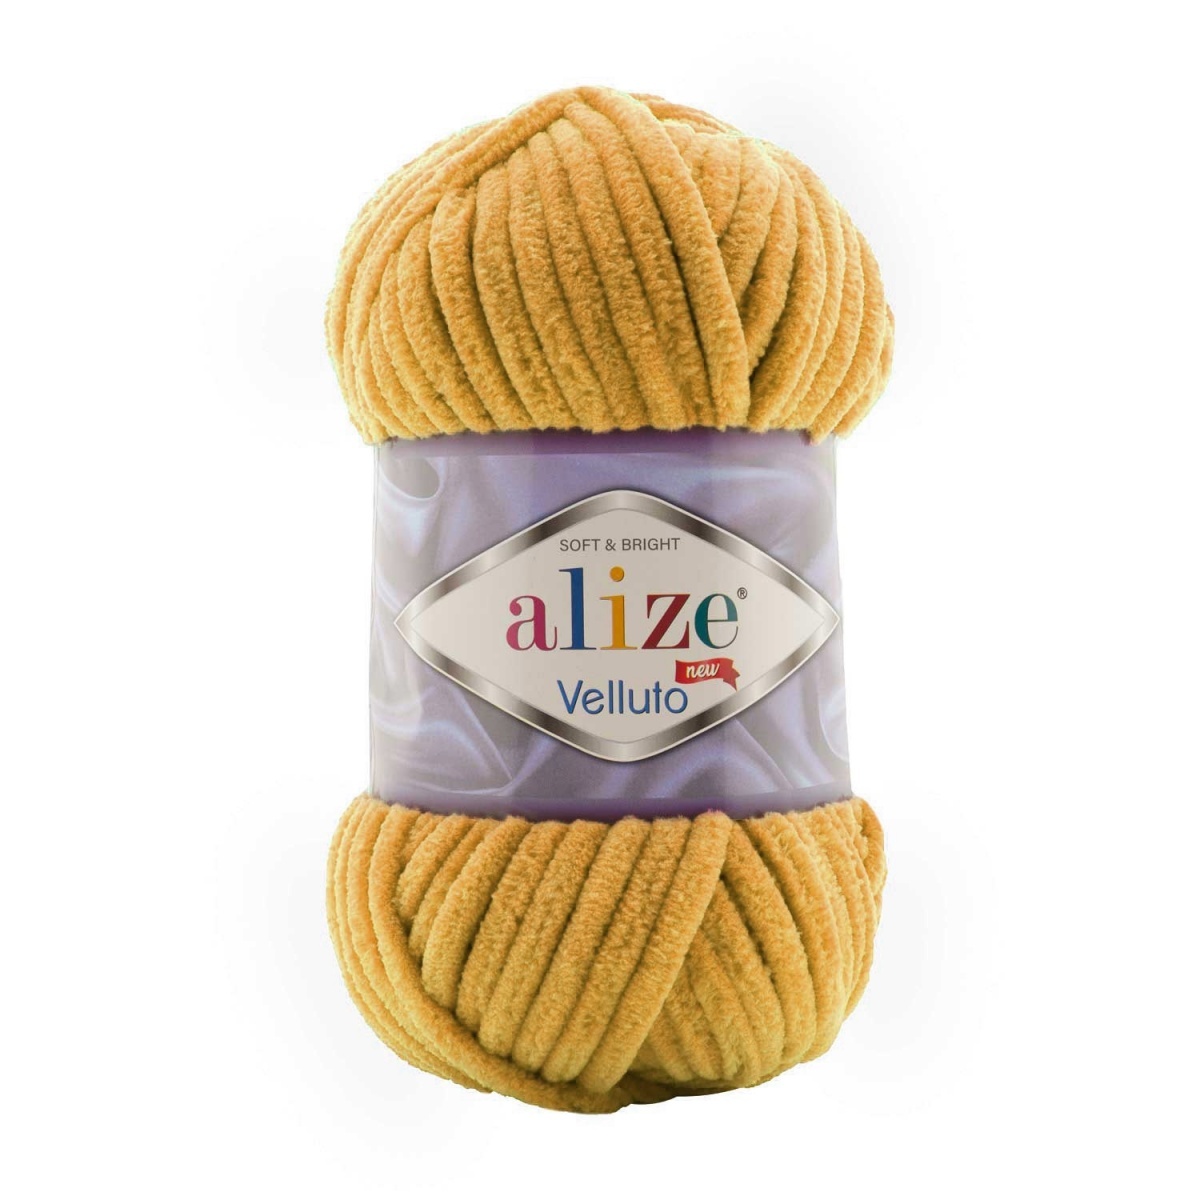 Alize Velluto, 100% Micropolyester 5 Skein Value Pack, 500g фото 1